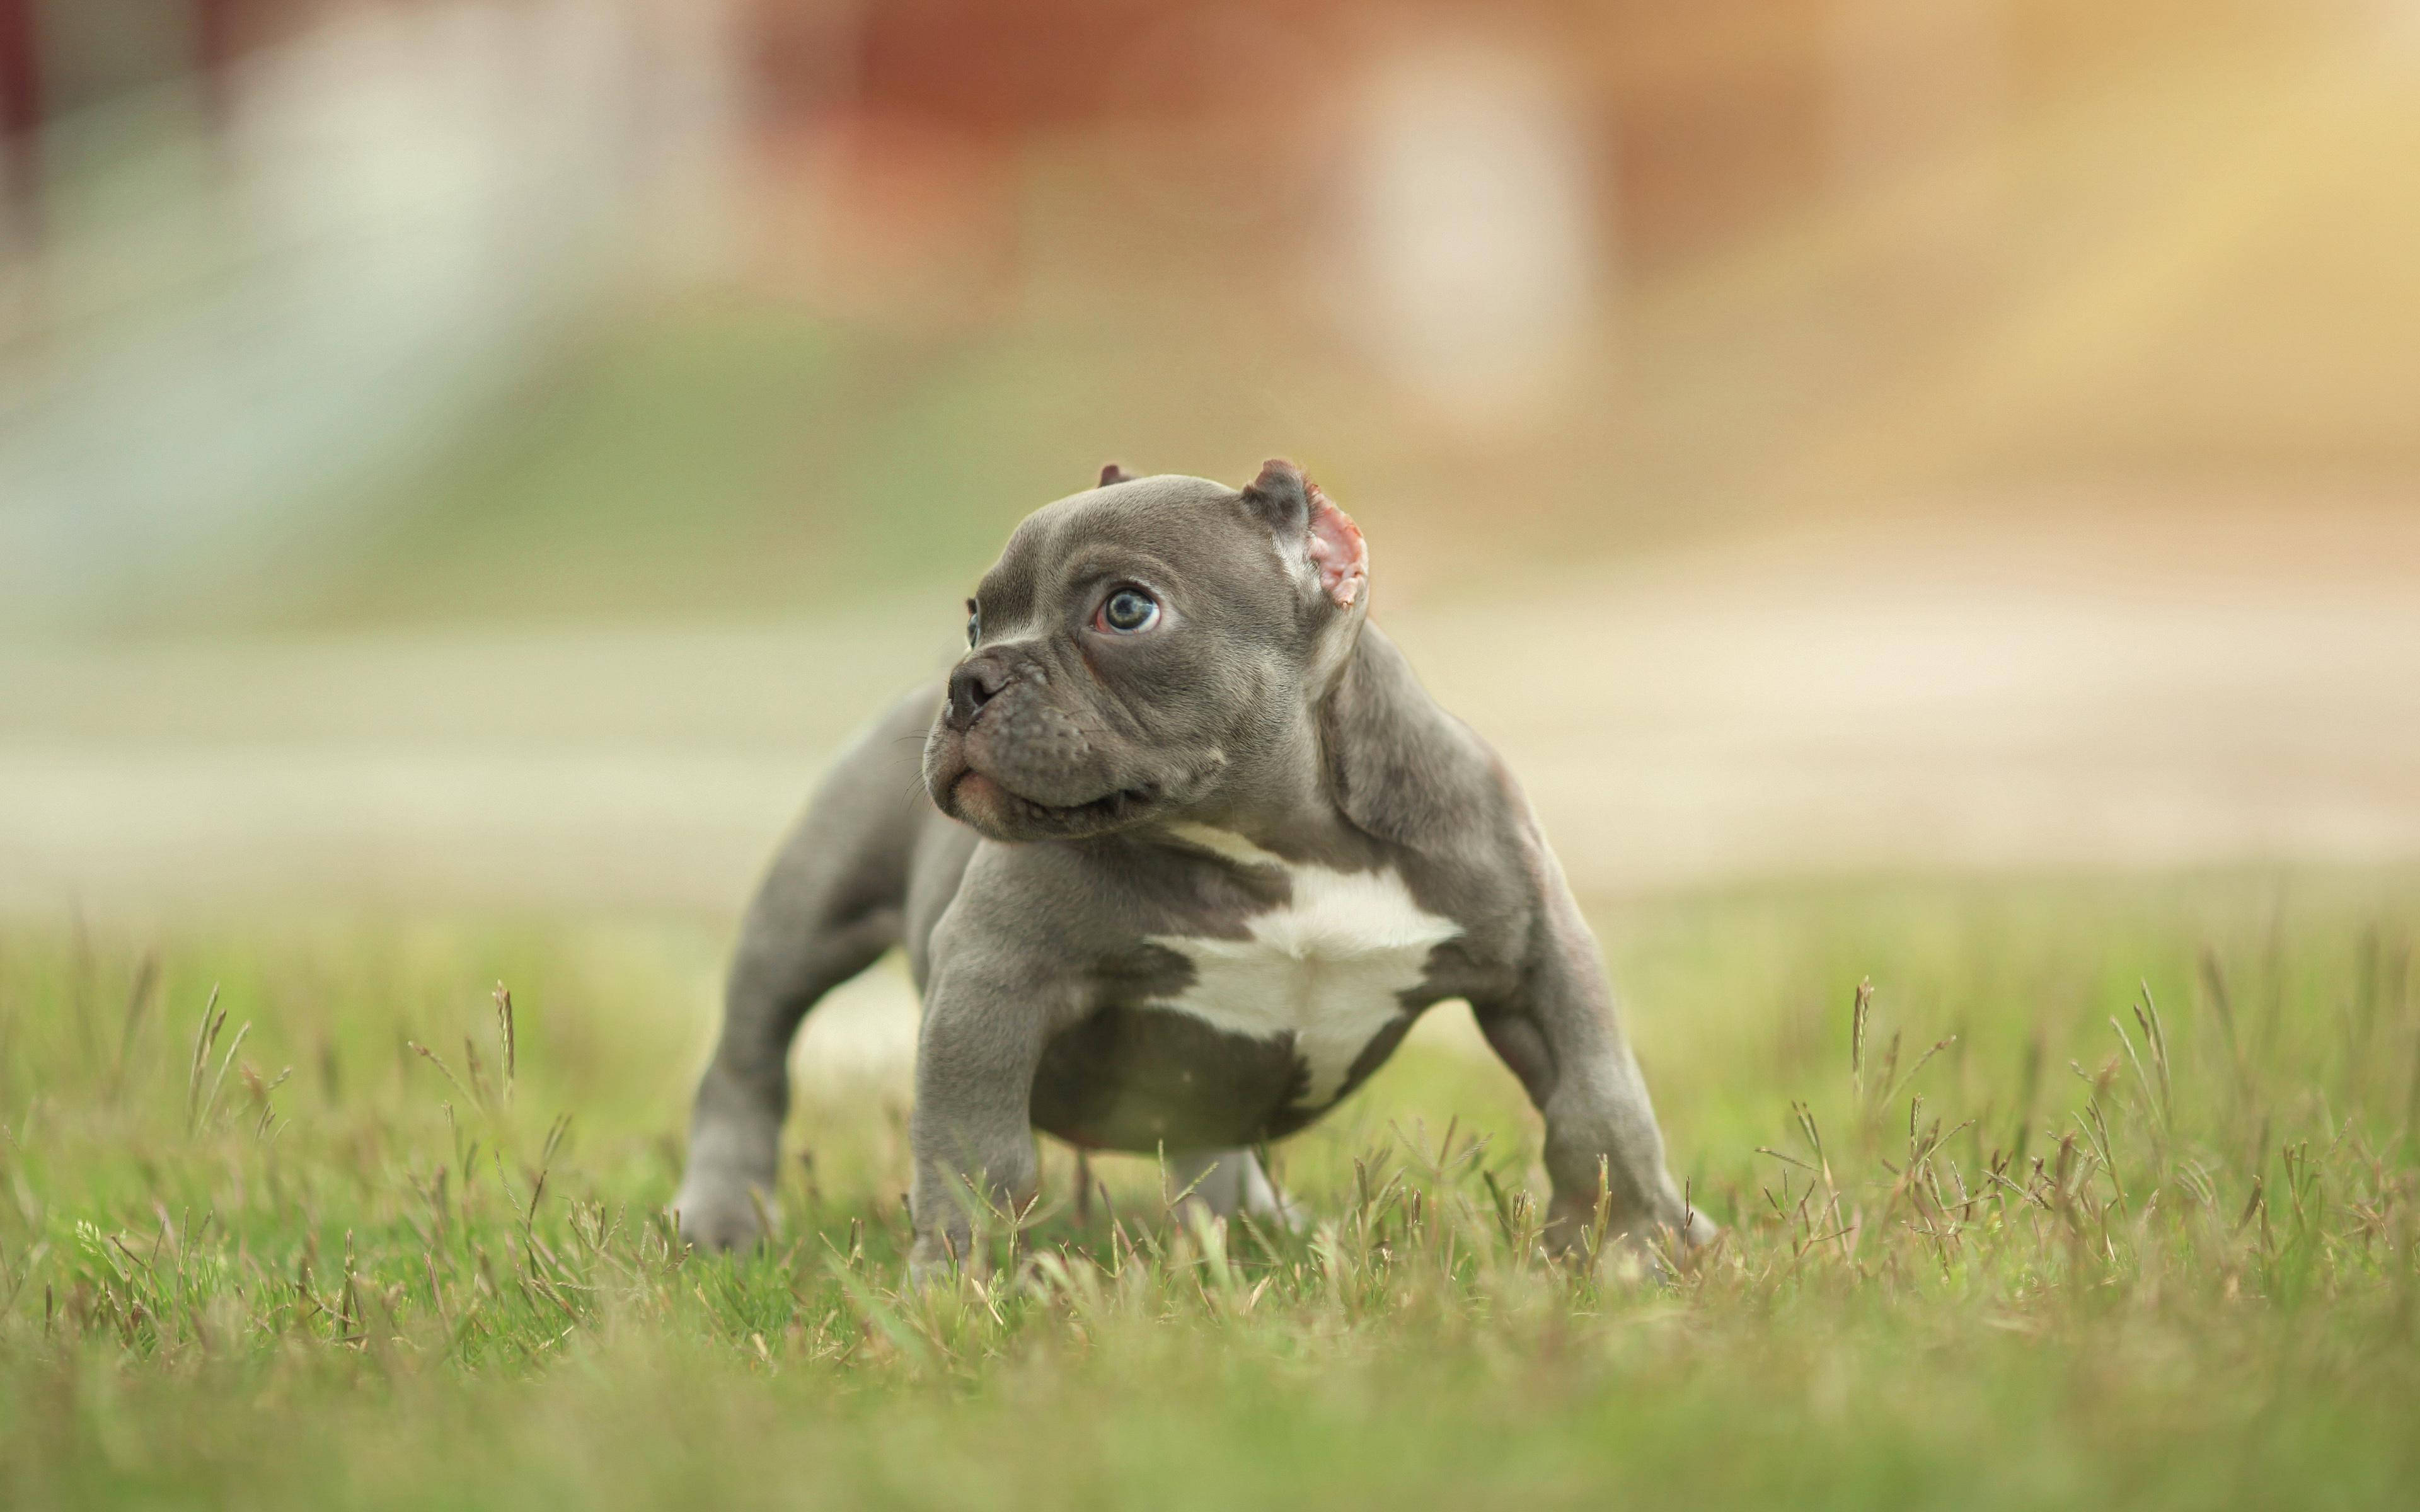 American Bully Puppy Dog On Grass Wallpaper